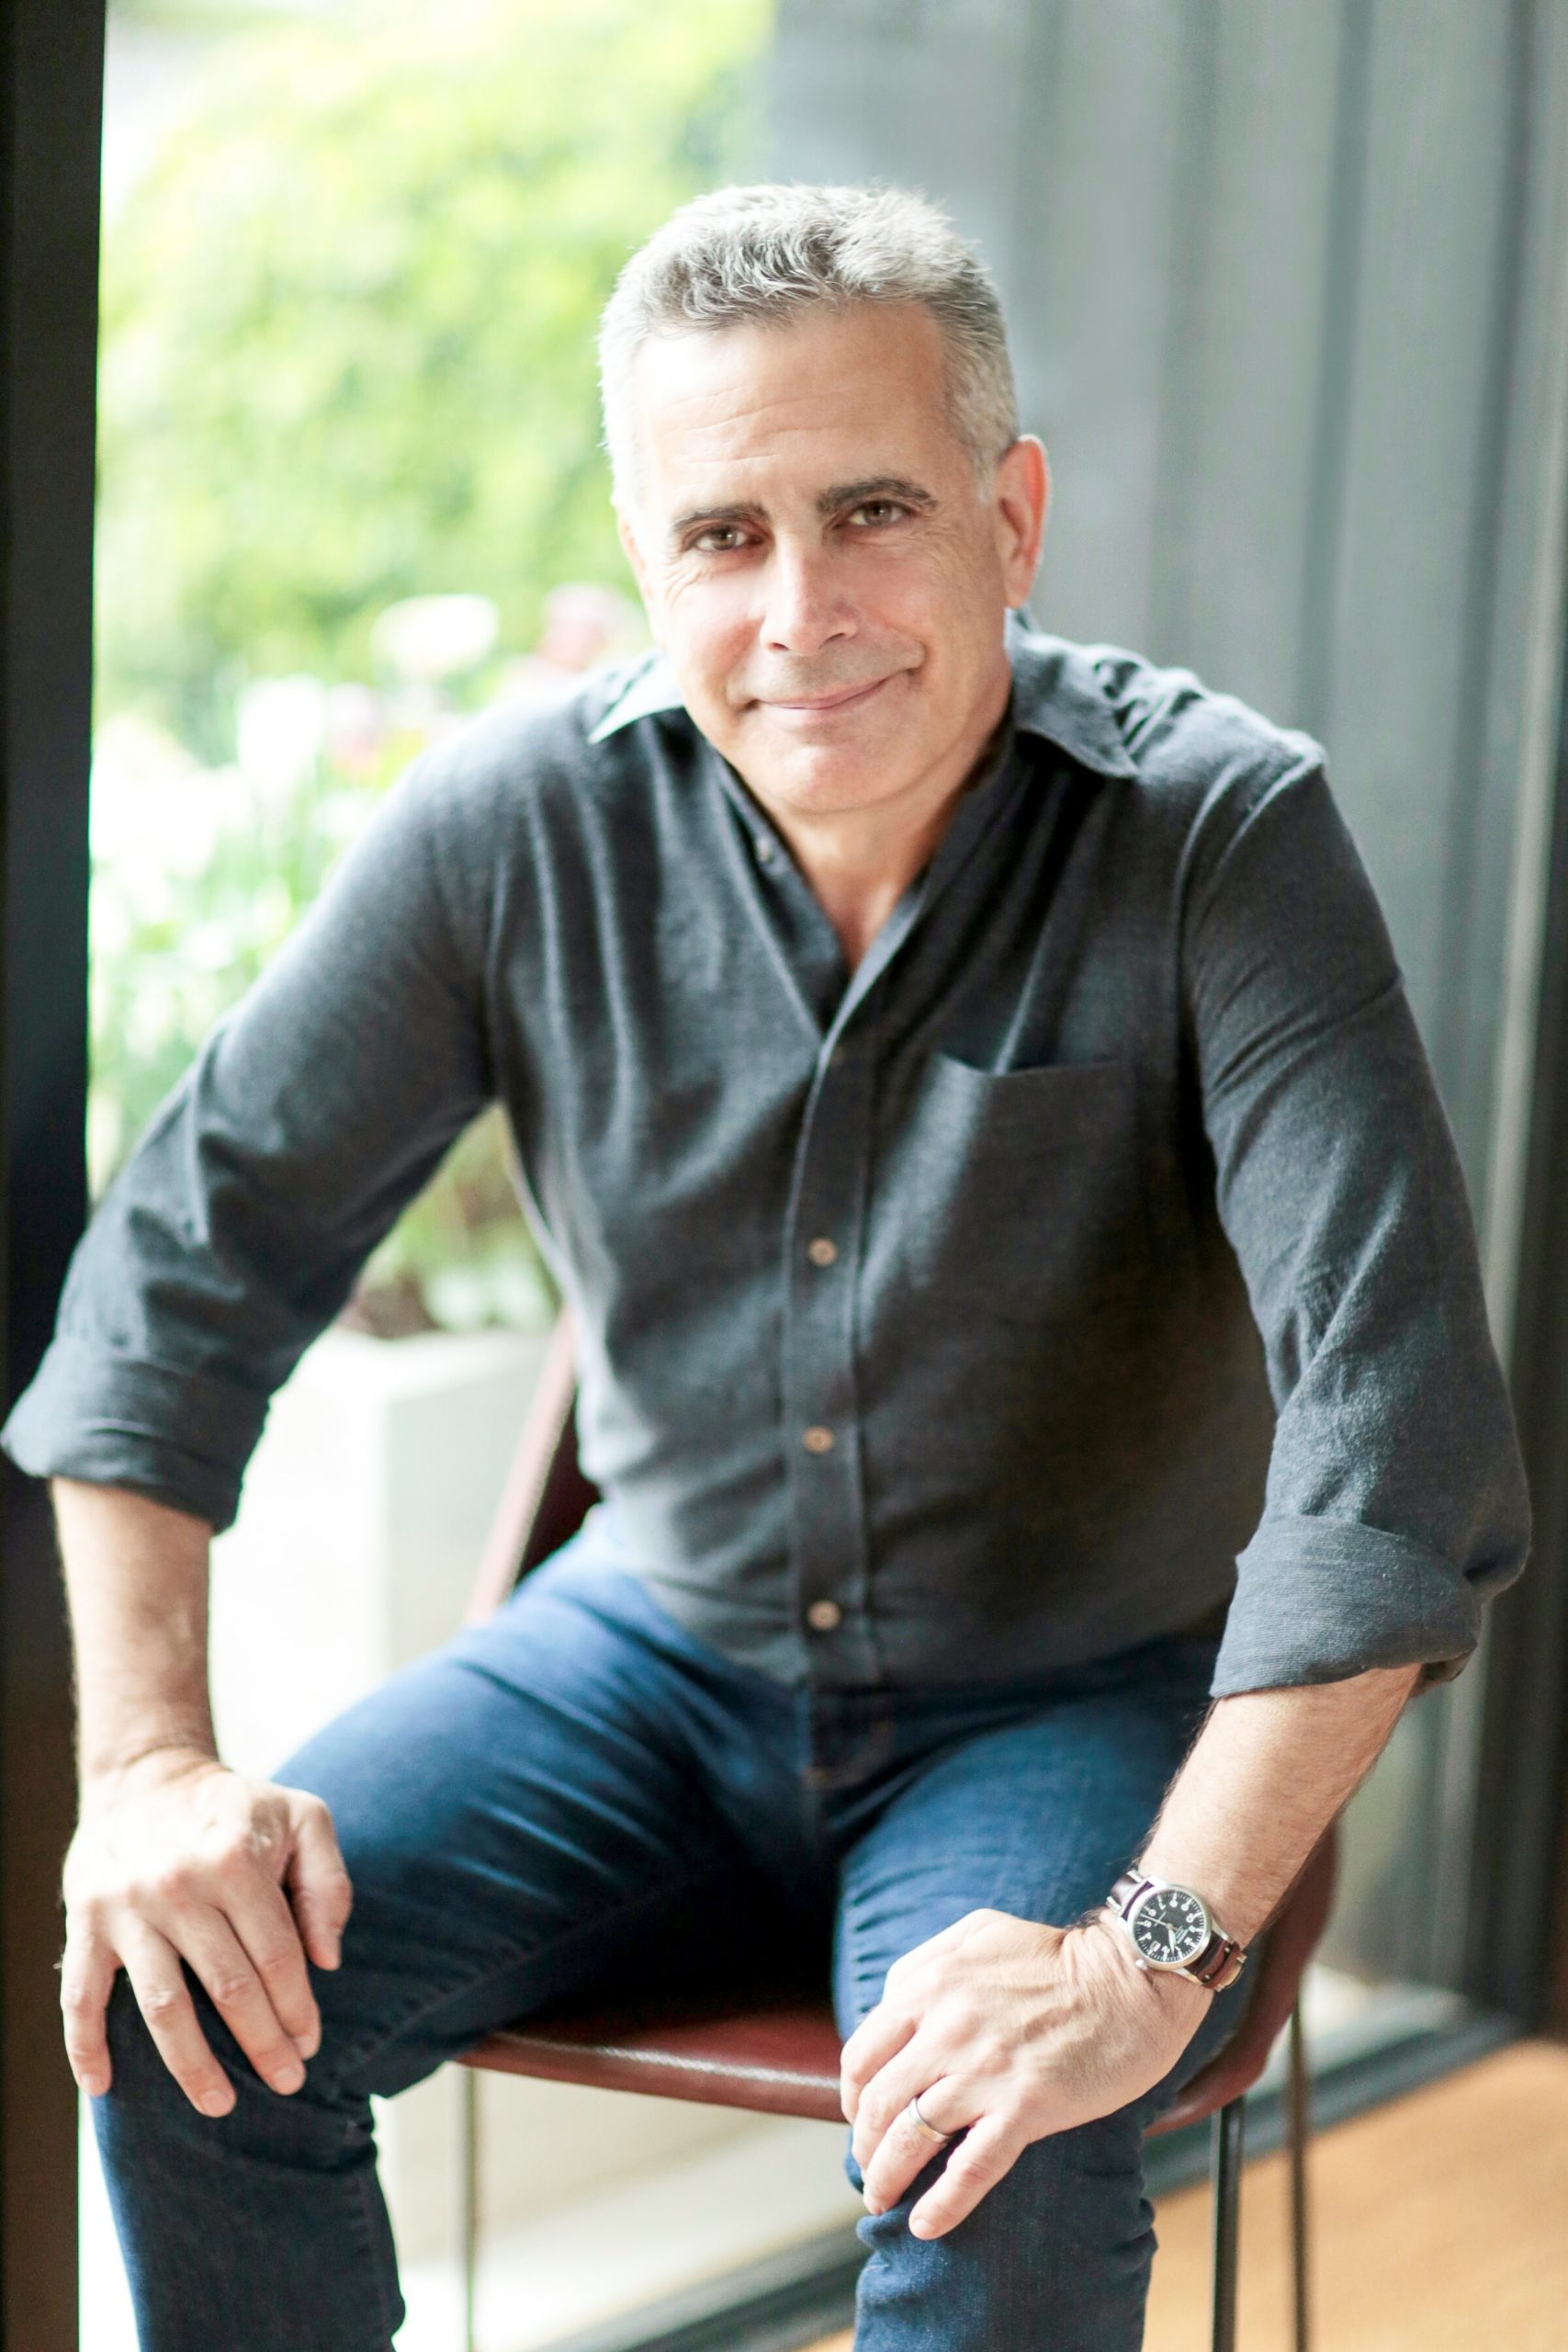 Christopher LaGuardia is the managing principal and founder of the LaGuardia Design Group in Water Mill.